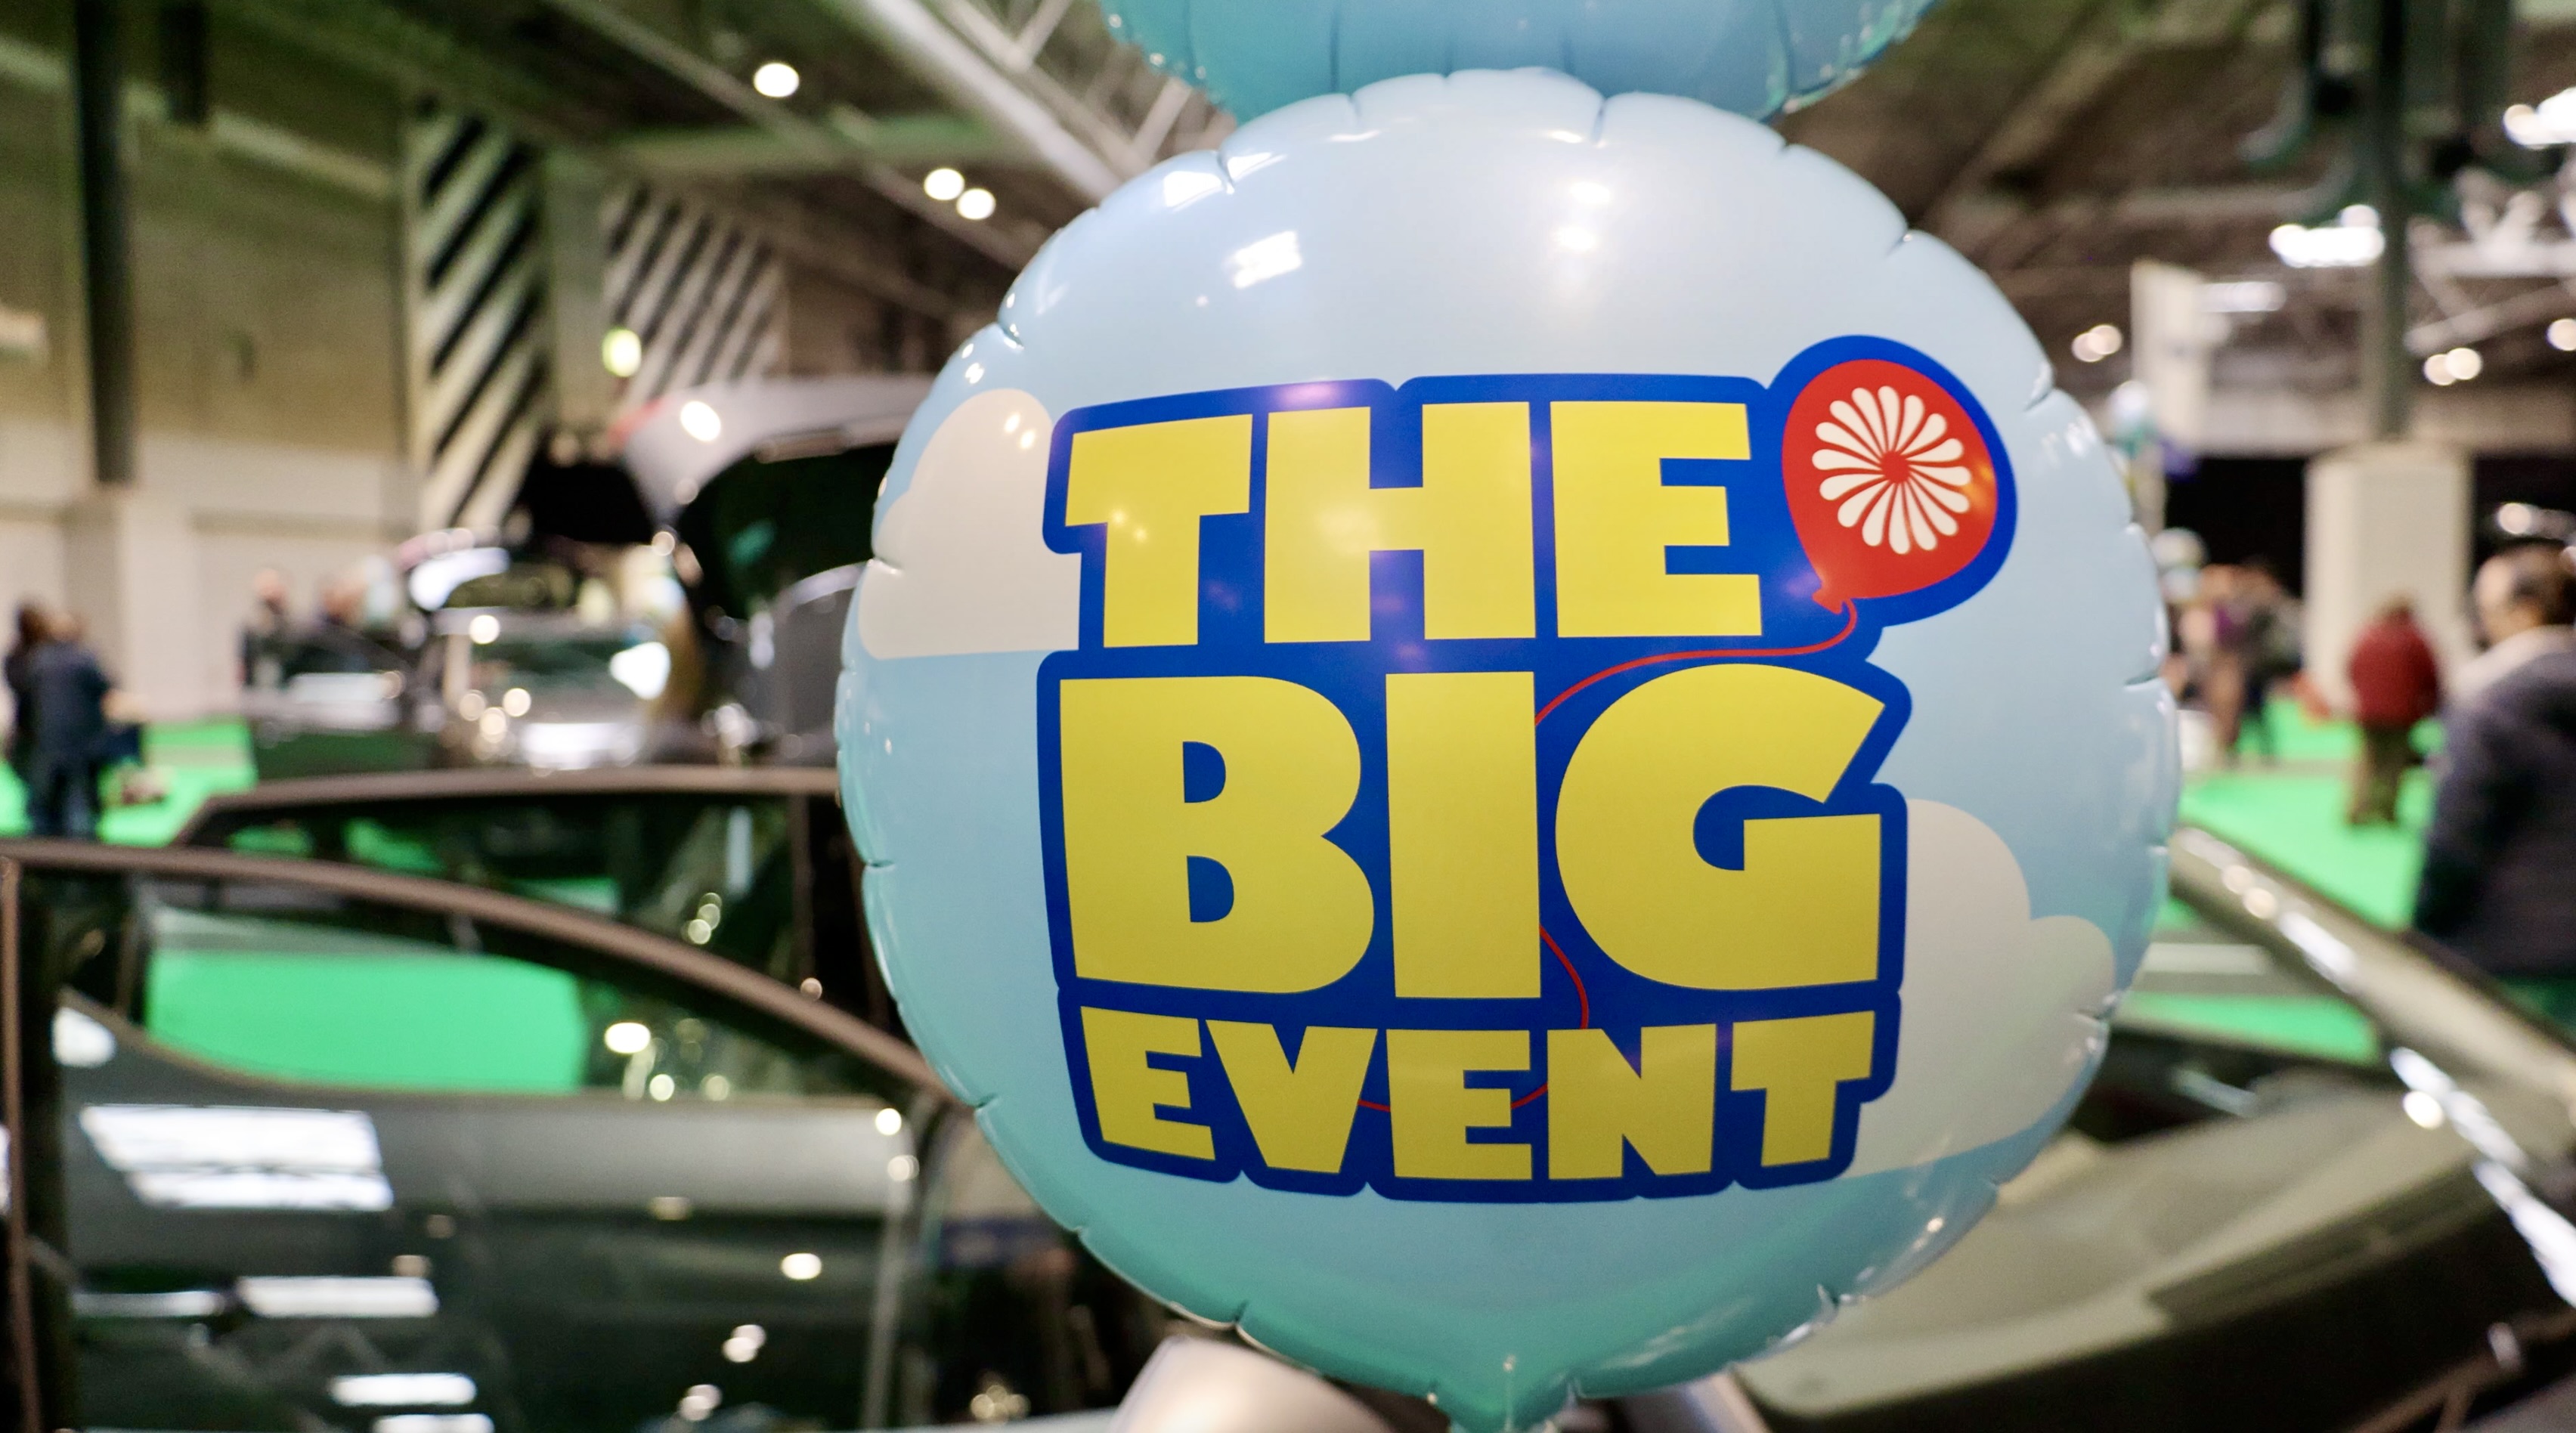 Motability: The Big Event and One Big Day are soon here